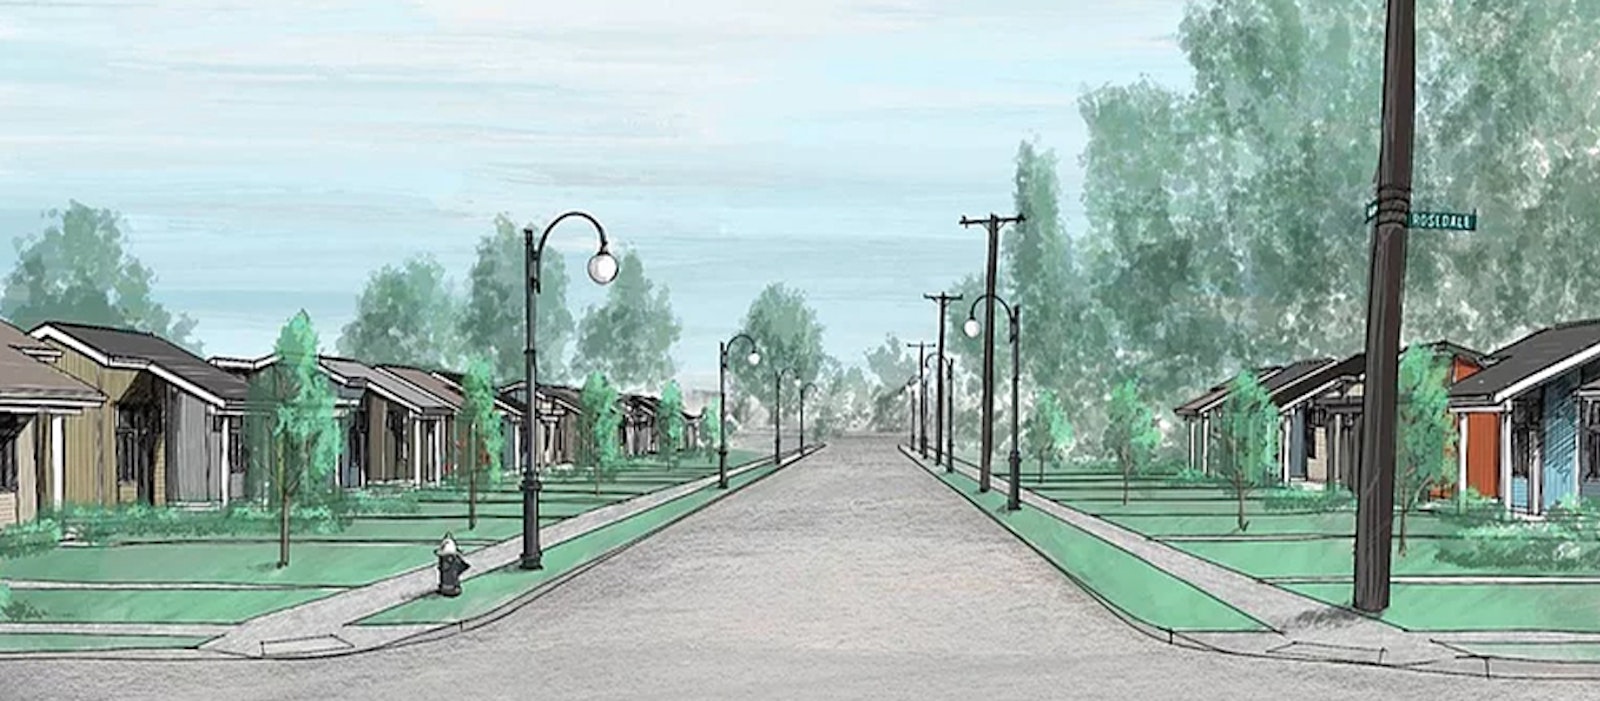 An artist’s rendering depicts the vision for Bluff Street in Toledo once construction is completed on the development of 20 tiny homes.